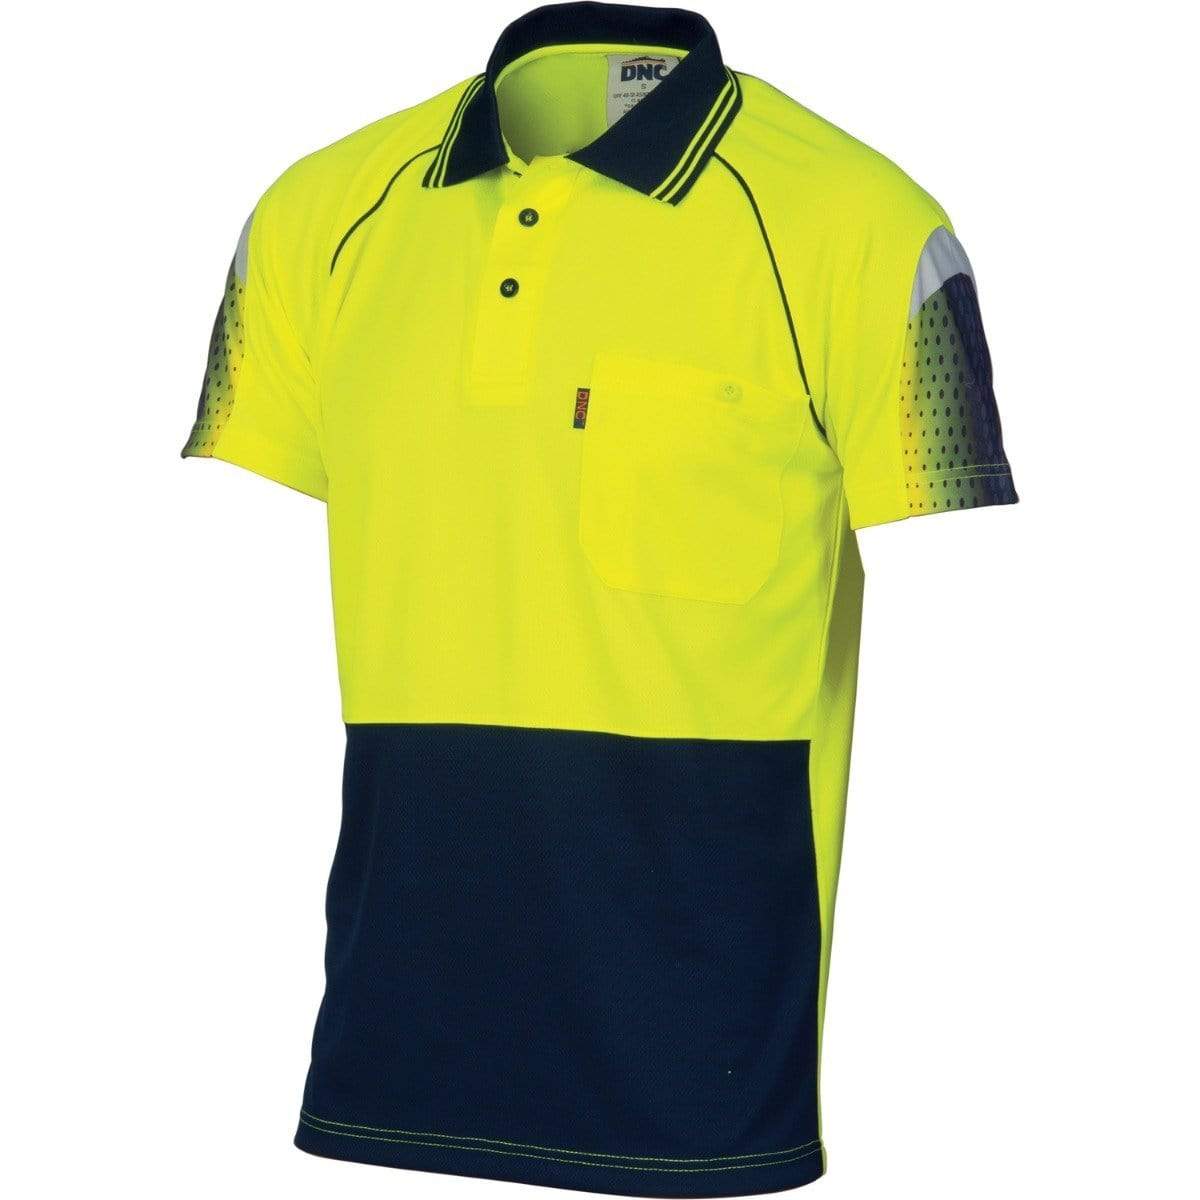 Dnc Workwear Hi-vis Cool-breathe Sublimated Piping Short Sleeve Polo - 3751 Work Wear DNC Workwear Yellow/Navy XS 